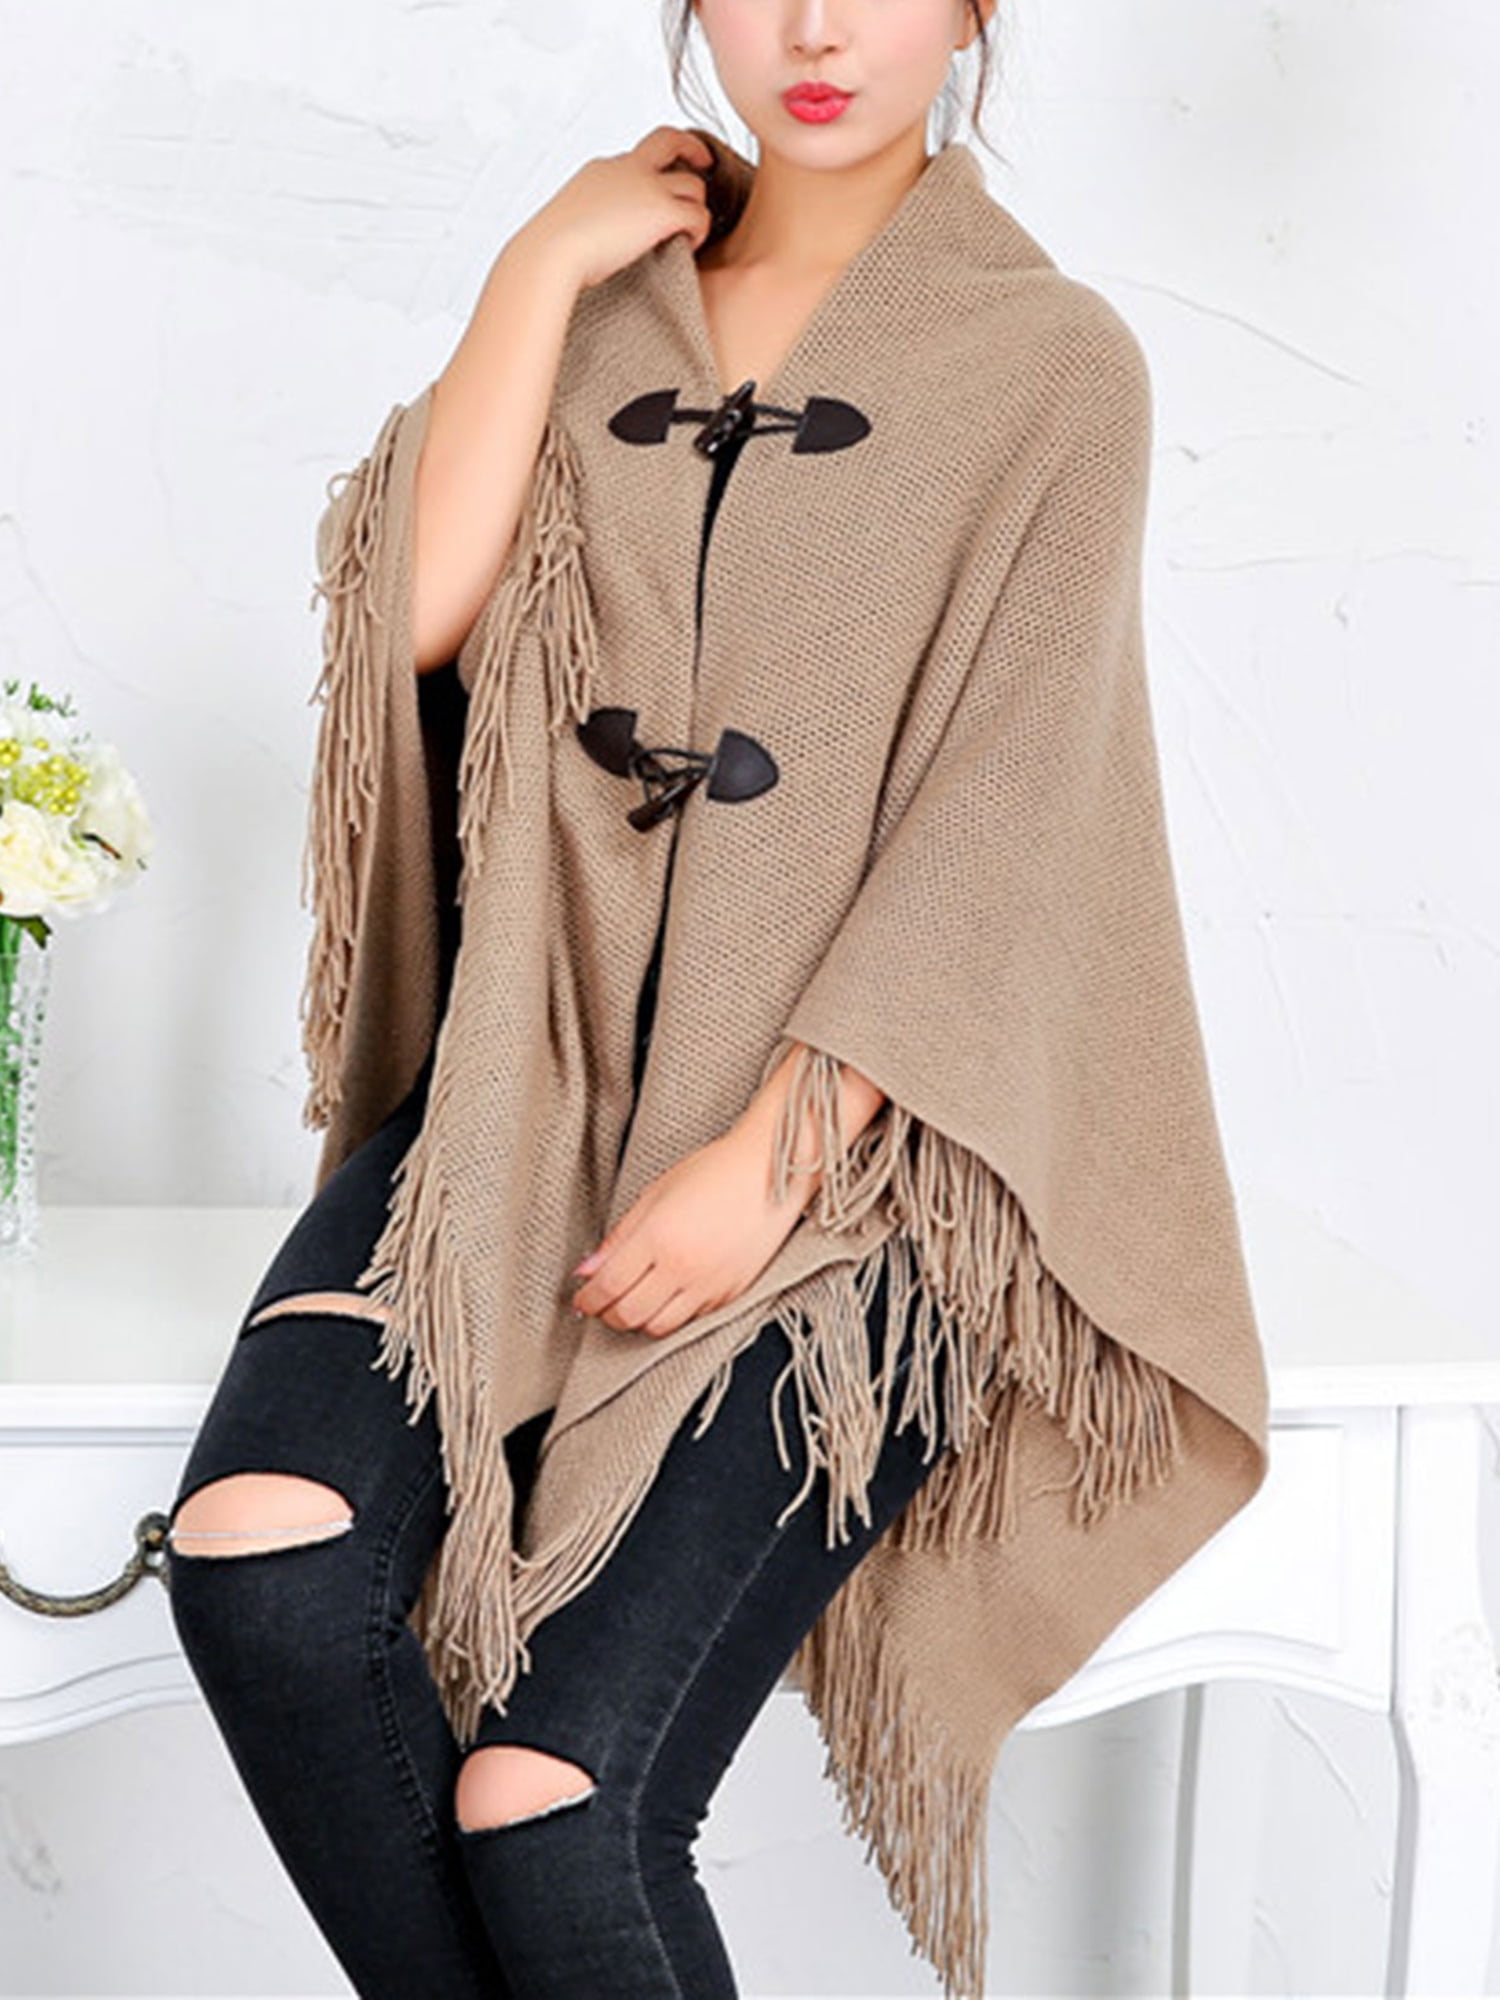 abstract Alleviate Refreshing Poncho Sweater Women Oversized Horn Buttons Knit Poncho Cape Coat Cardigan  Shawl Tassel Wrap Sweater for Women - Walmart.com